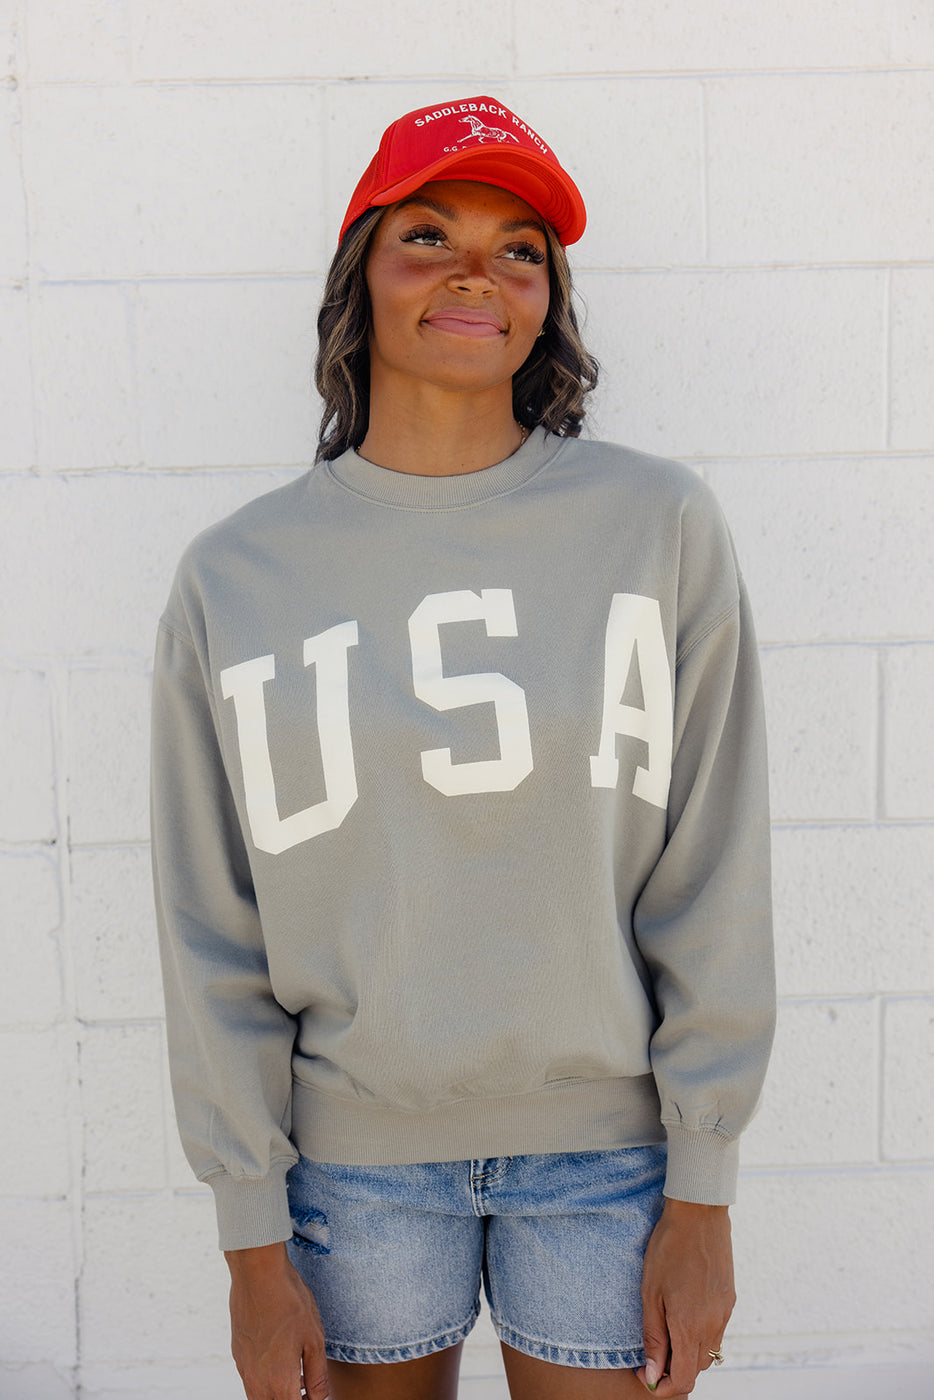 a woman wearing a red hat and a grey sweatshirt